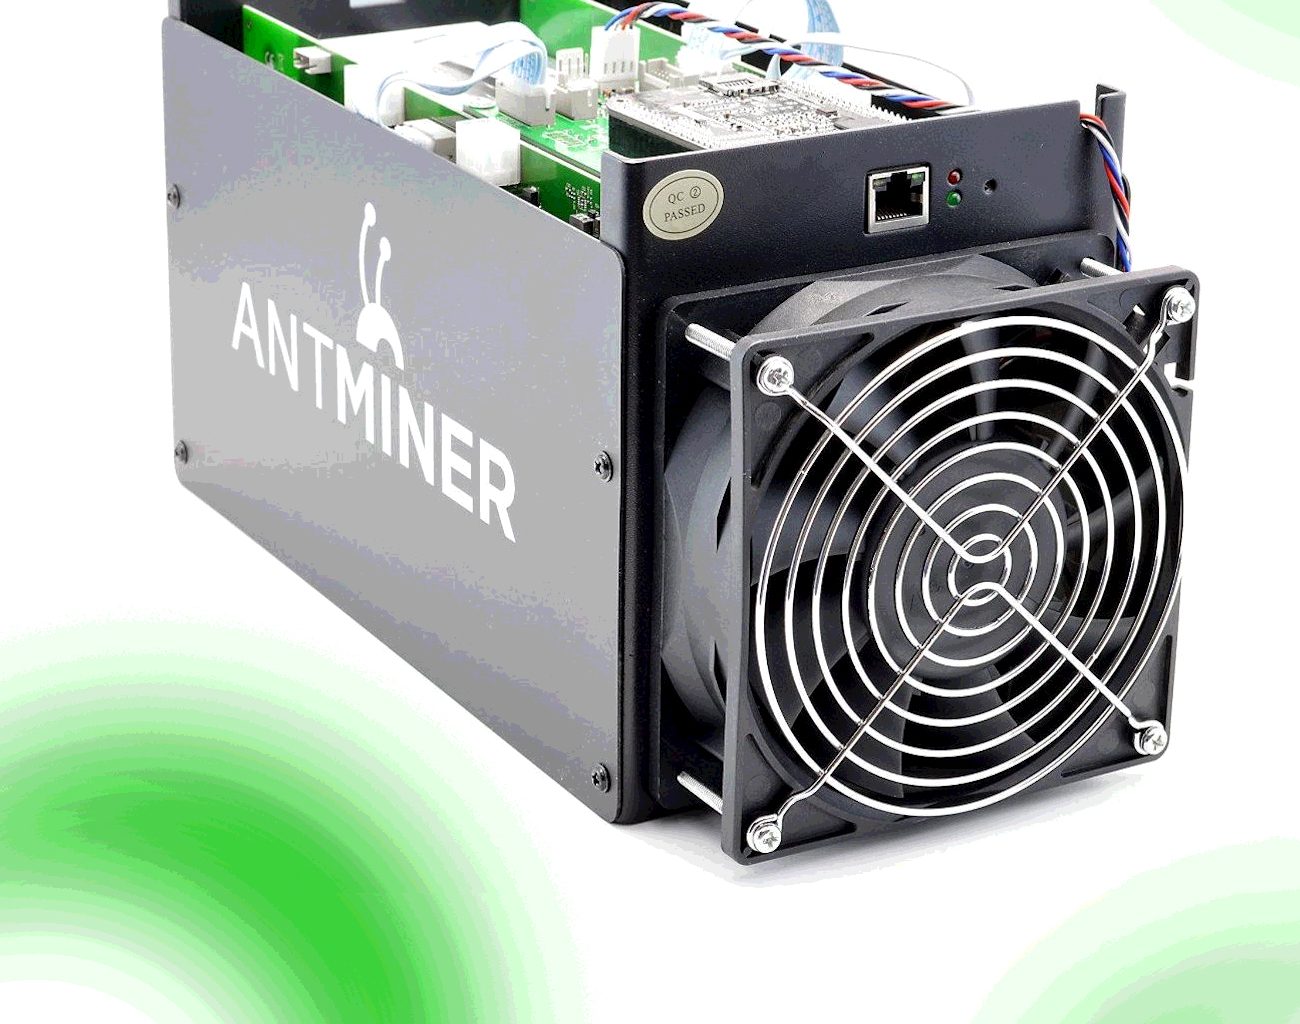 Bitmain S9 Antminer hardware unboxing bitcoin profitable btc miner and alt crypto currency coins